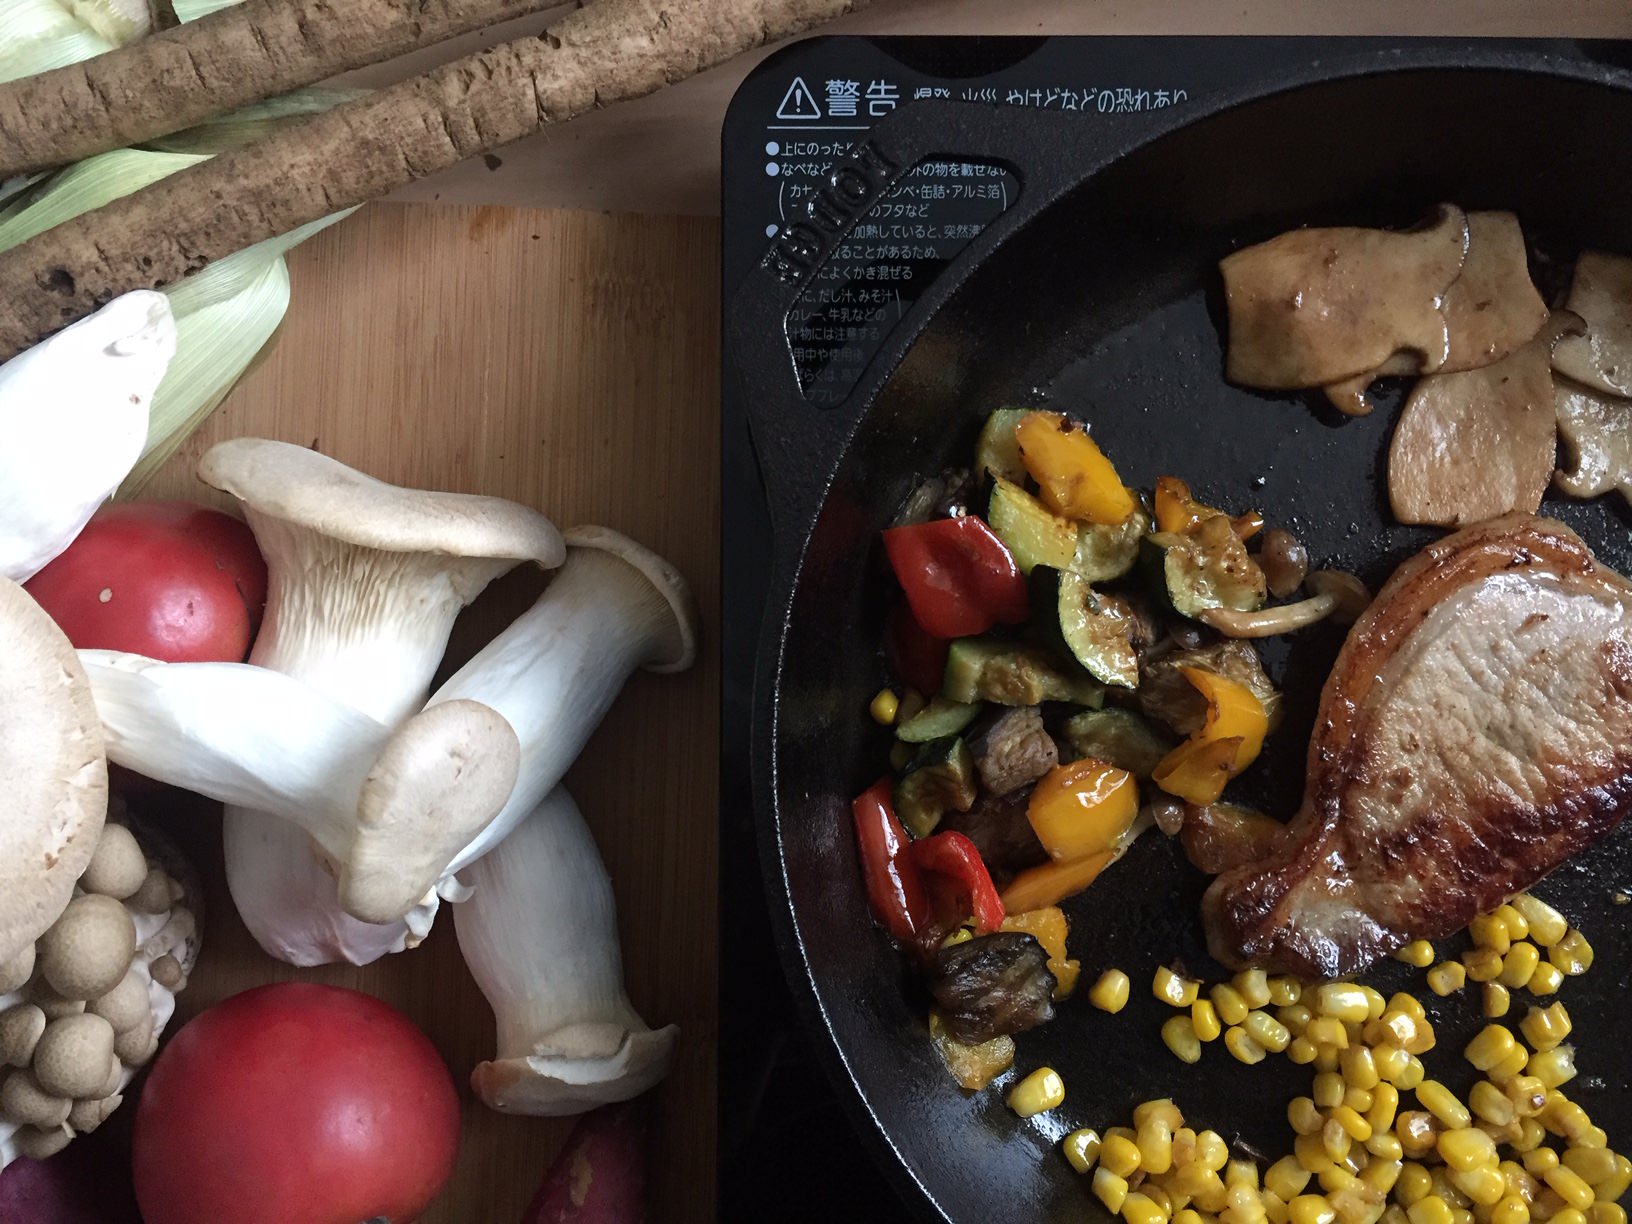 Why Everyone Should be Cooking with Cast Iron